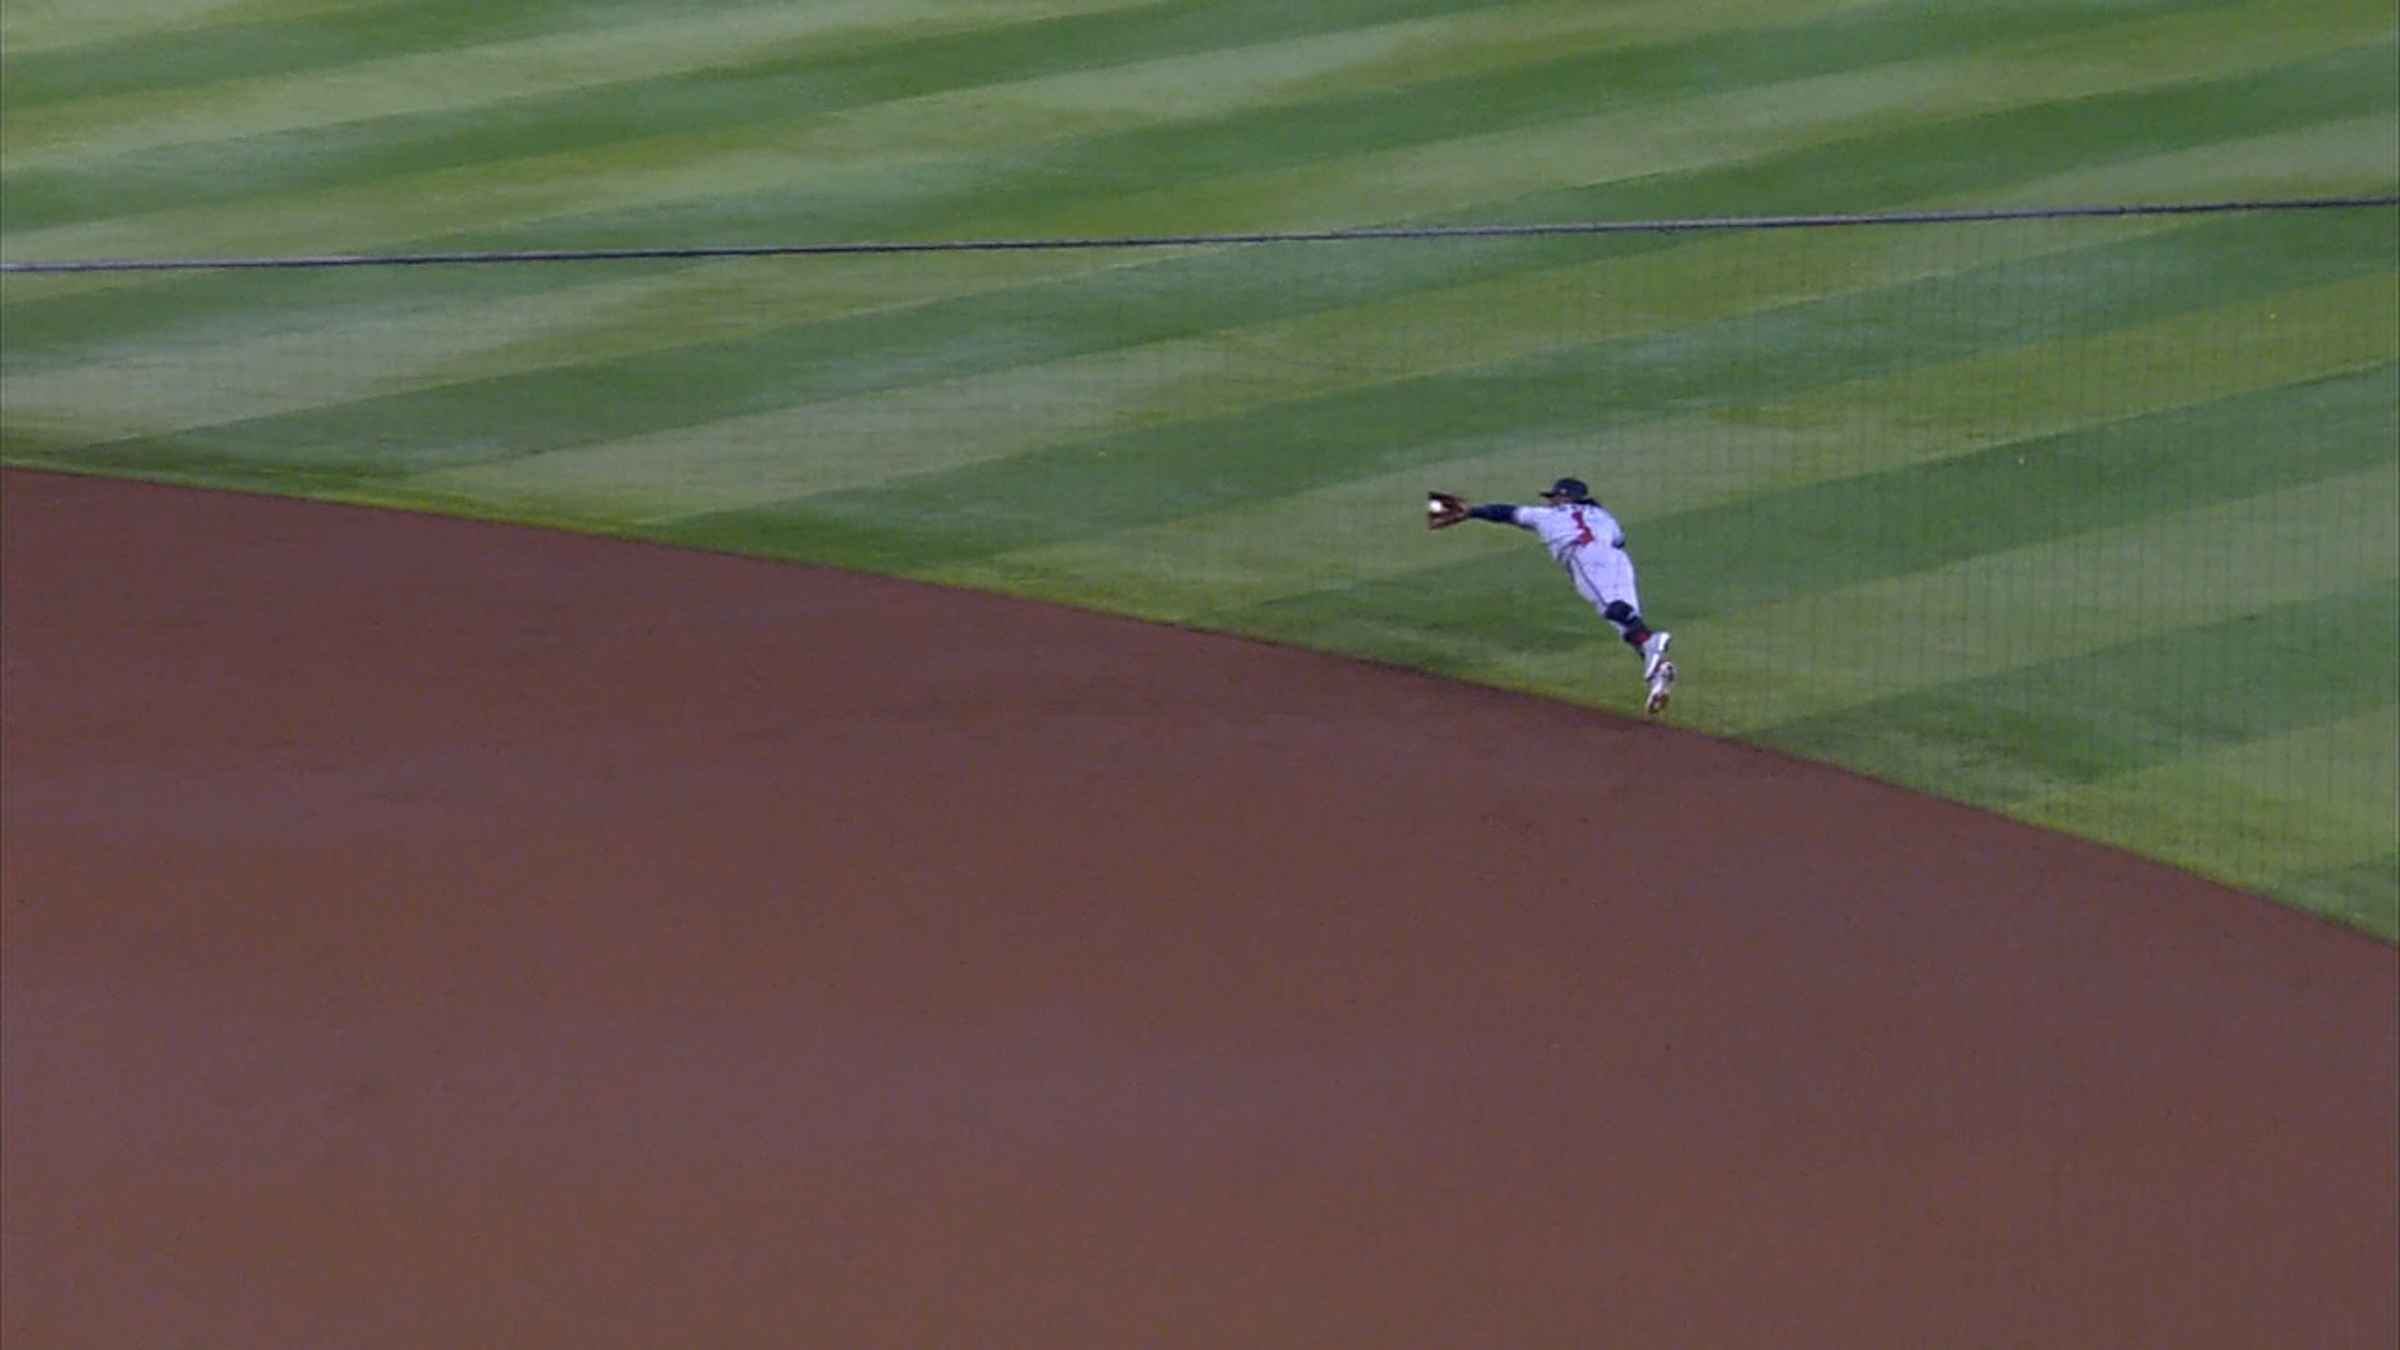 Ozzie makes an incredible diving stop, throw 